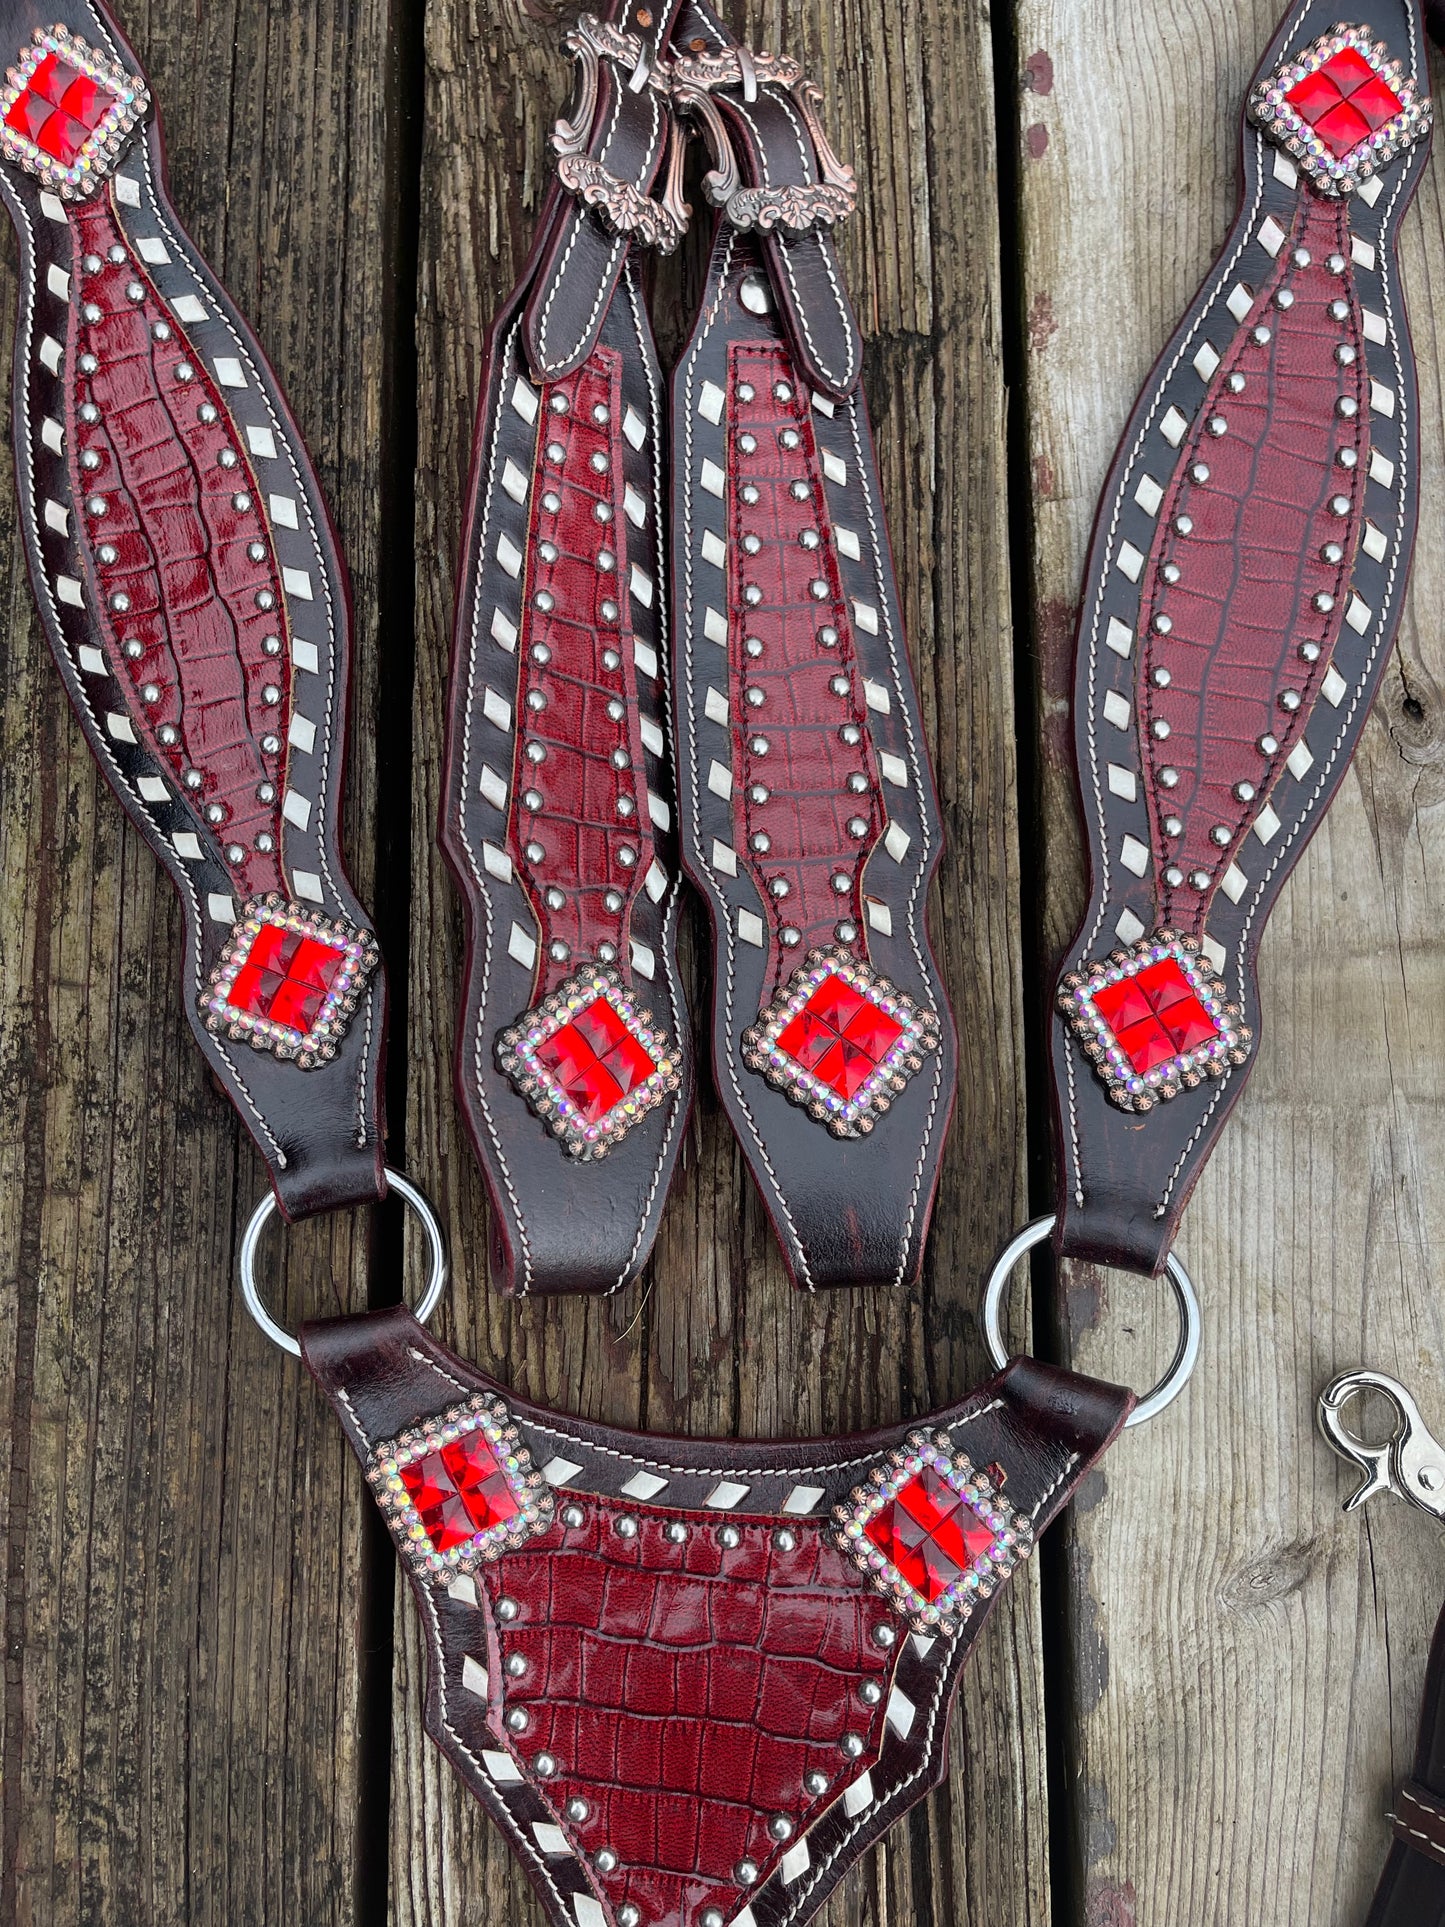 Dark brown tack set with red accent